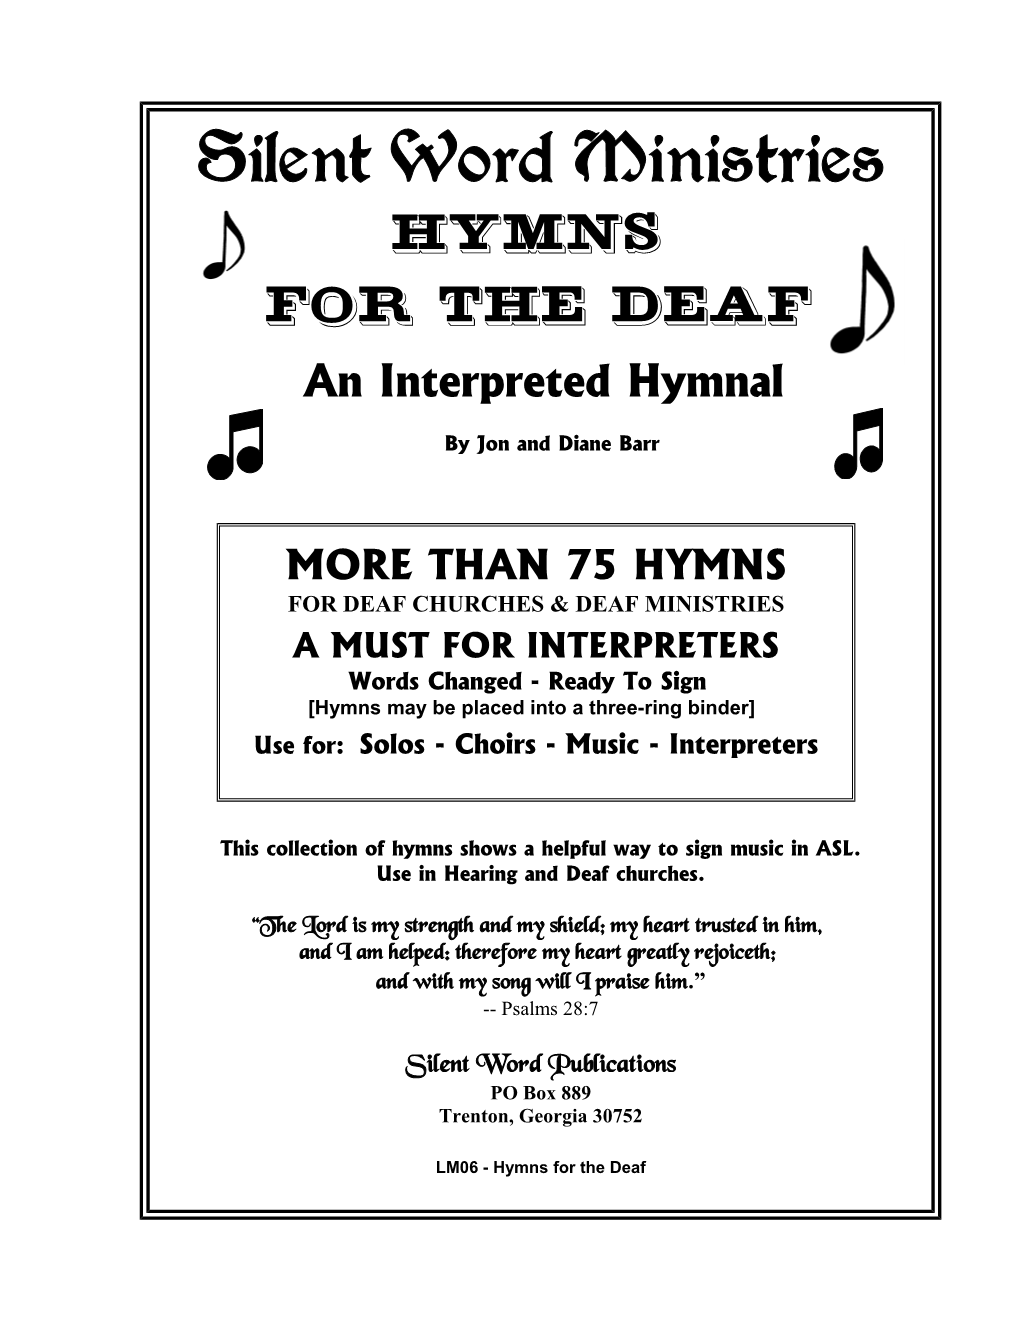 Hymns for the Deaf an Interpreted Hymnal